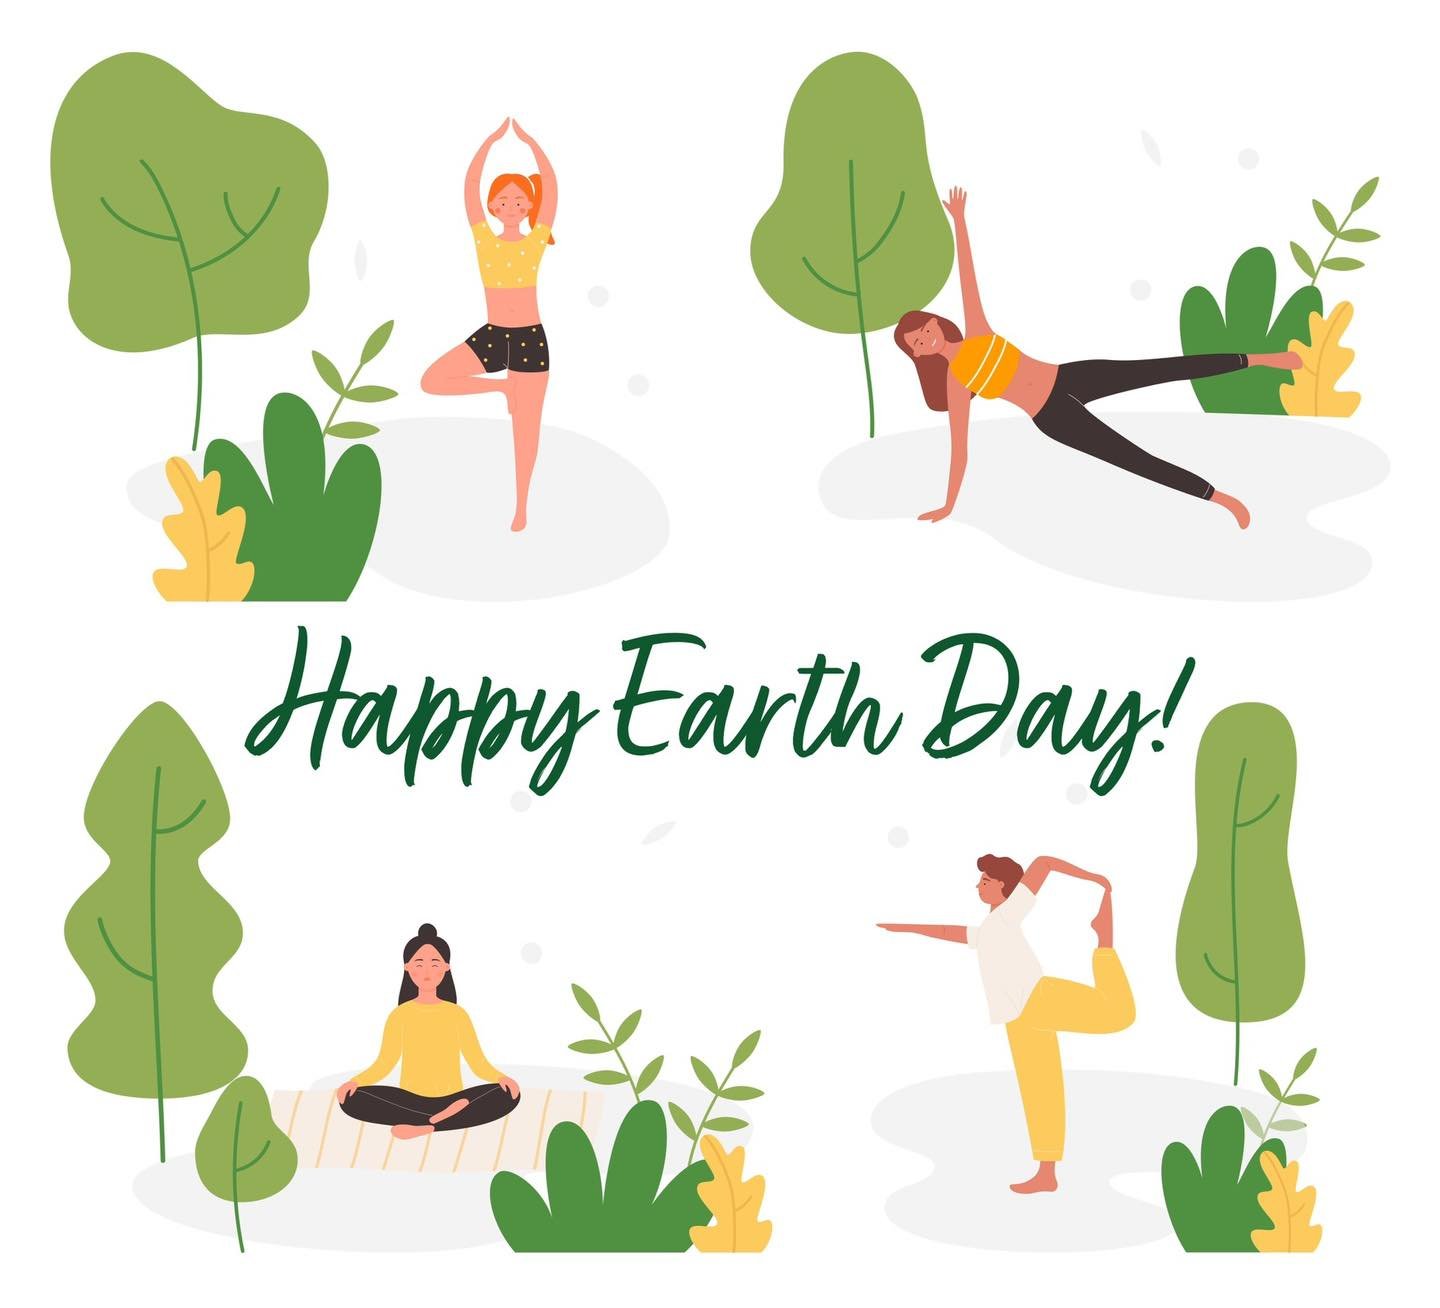 &ldquo;We are children of the earth. We rely on the earth, and the earth relies on us. Whether the earth is beautiful, fresh, and green, or arid and parched, depends on our way of walking. Please touch the earth in mindfulness, with joy and concentra